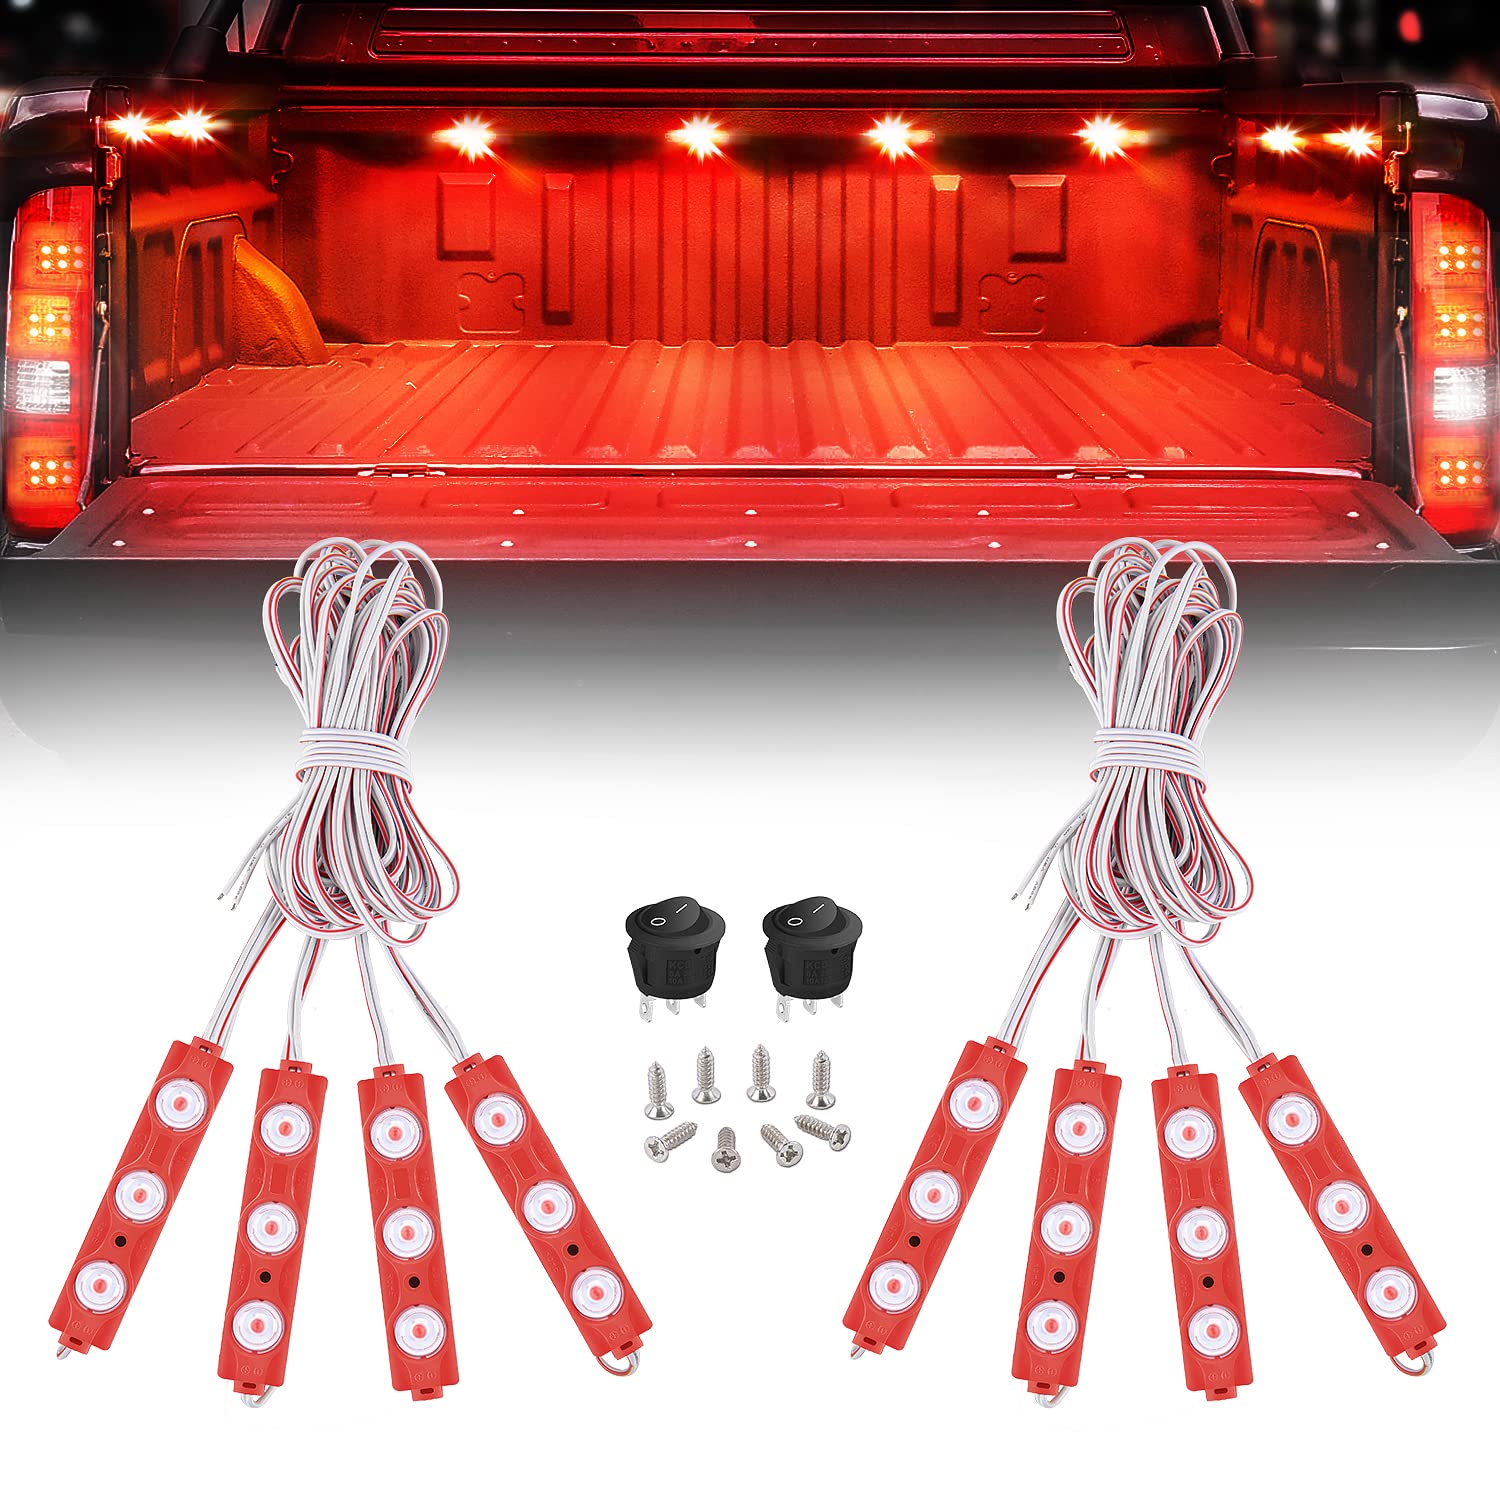 Nilight 8PCS Truck Pickup Bed Light 24LED Red Cargo Rock Lighting Kits with Switch for Van Off-Road Under Car Side Marker Foot Wells Rail, 2 Years Warranty von Nilight